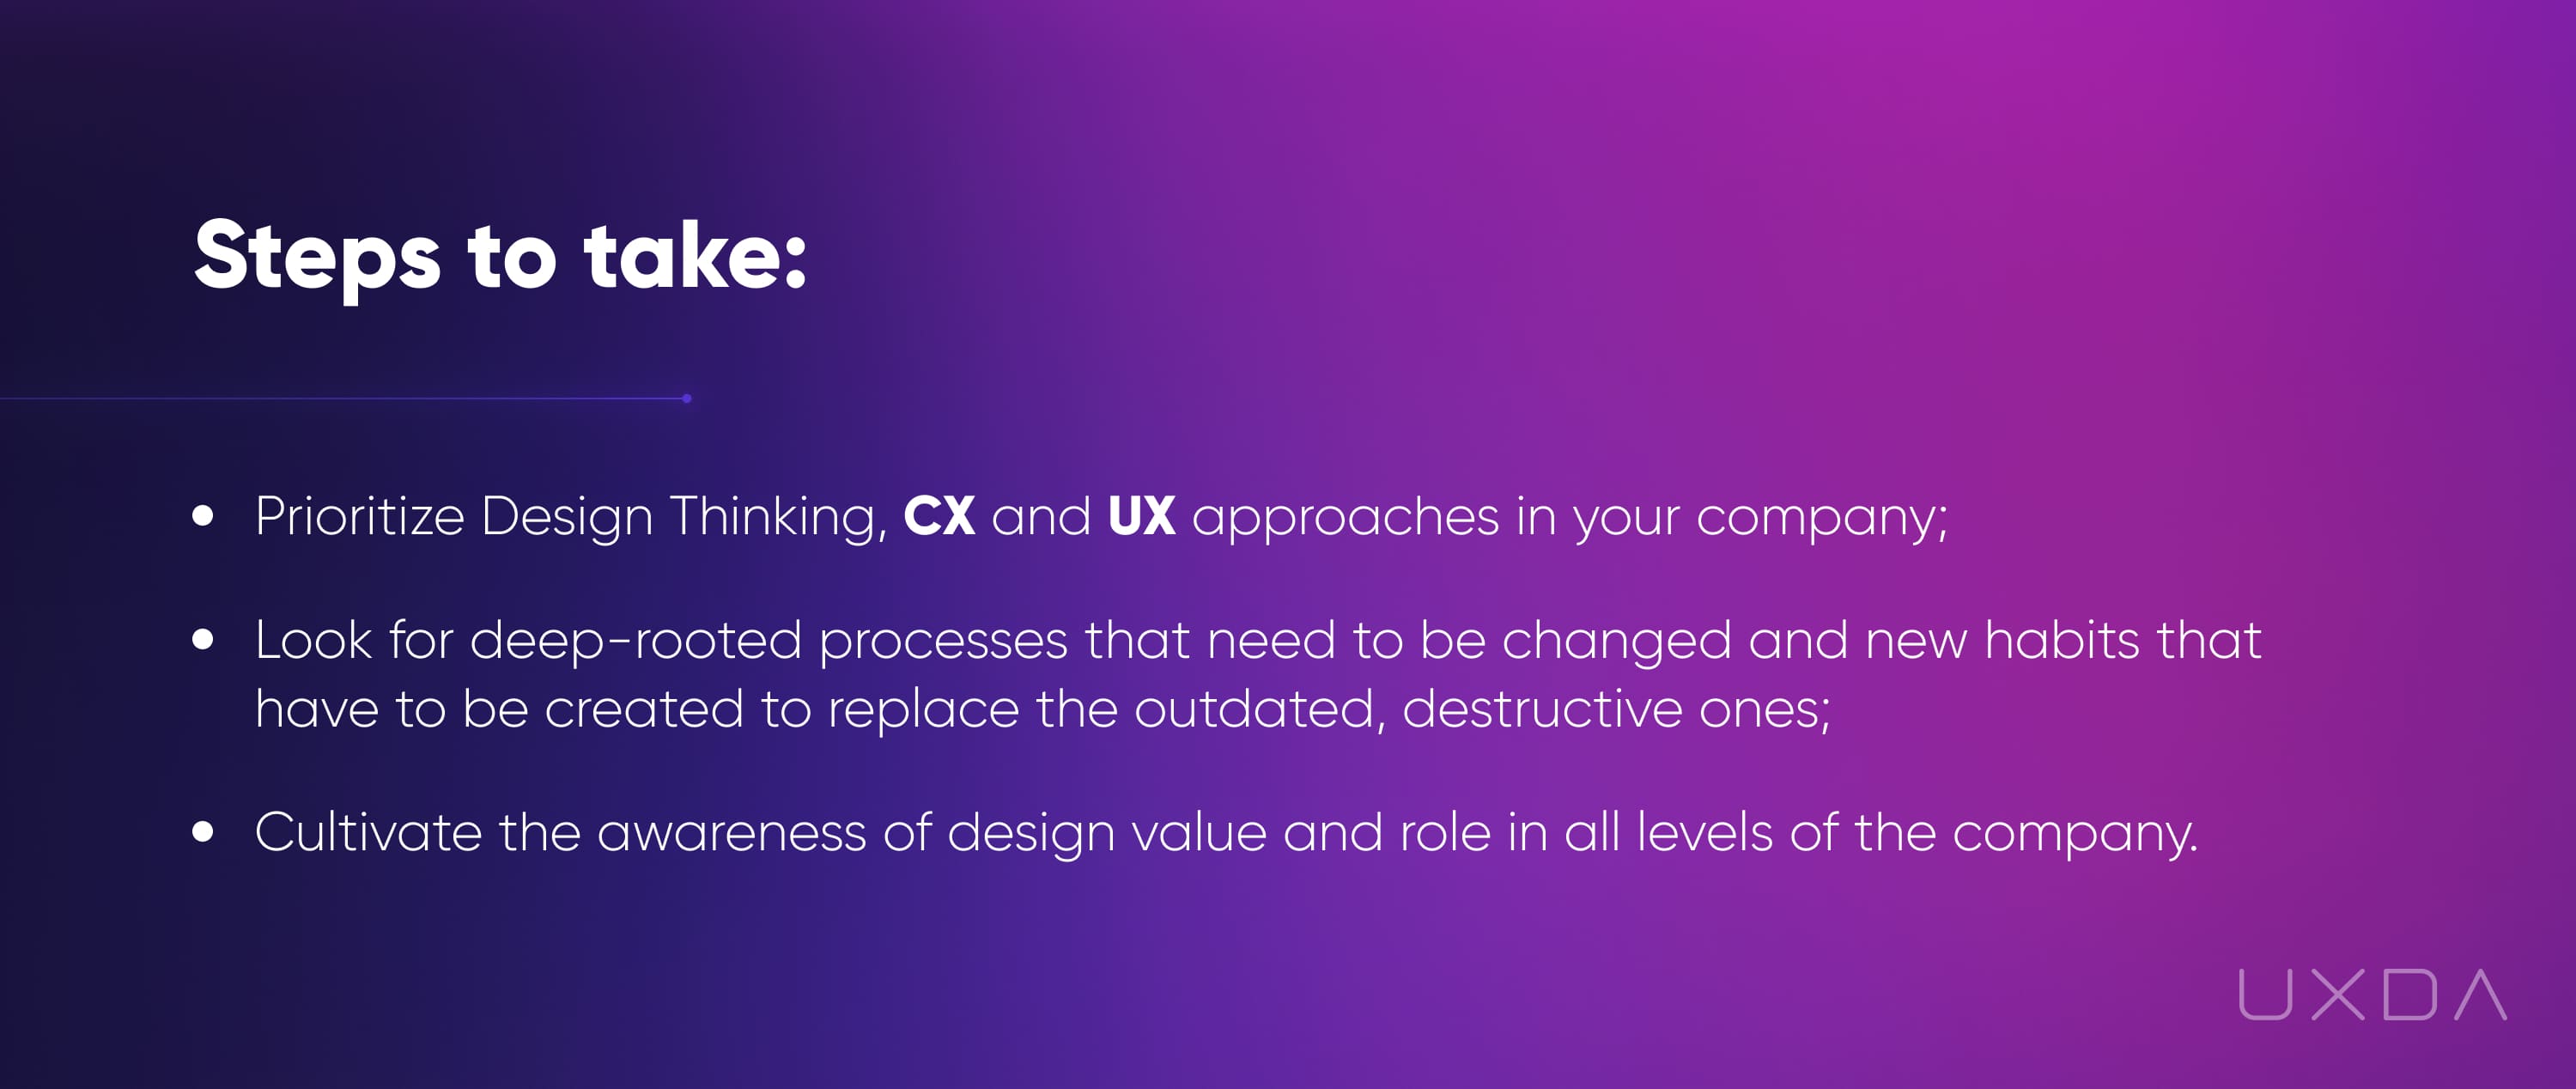 Financial UX Methodology Design Pyramid Product steps to take prioritise UX CX